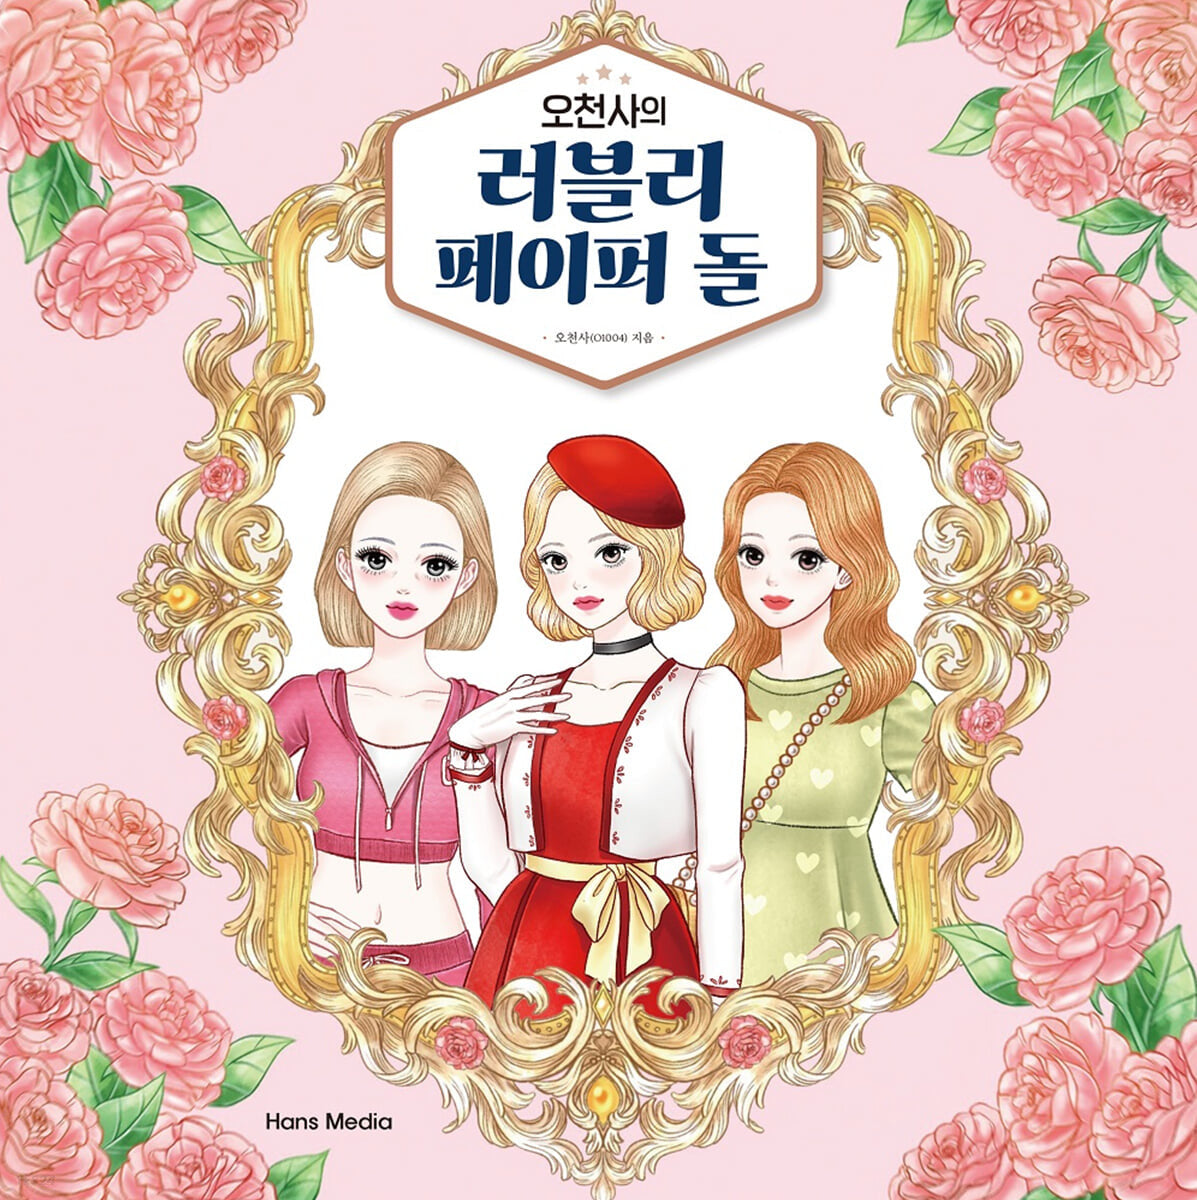 Lovely Paper Doll book by O1004